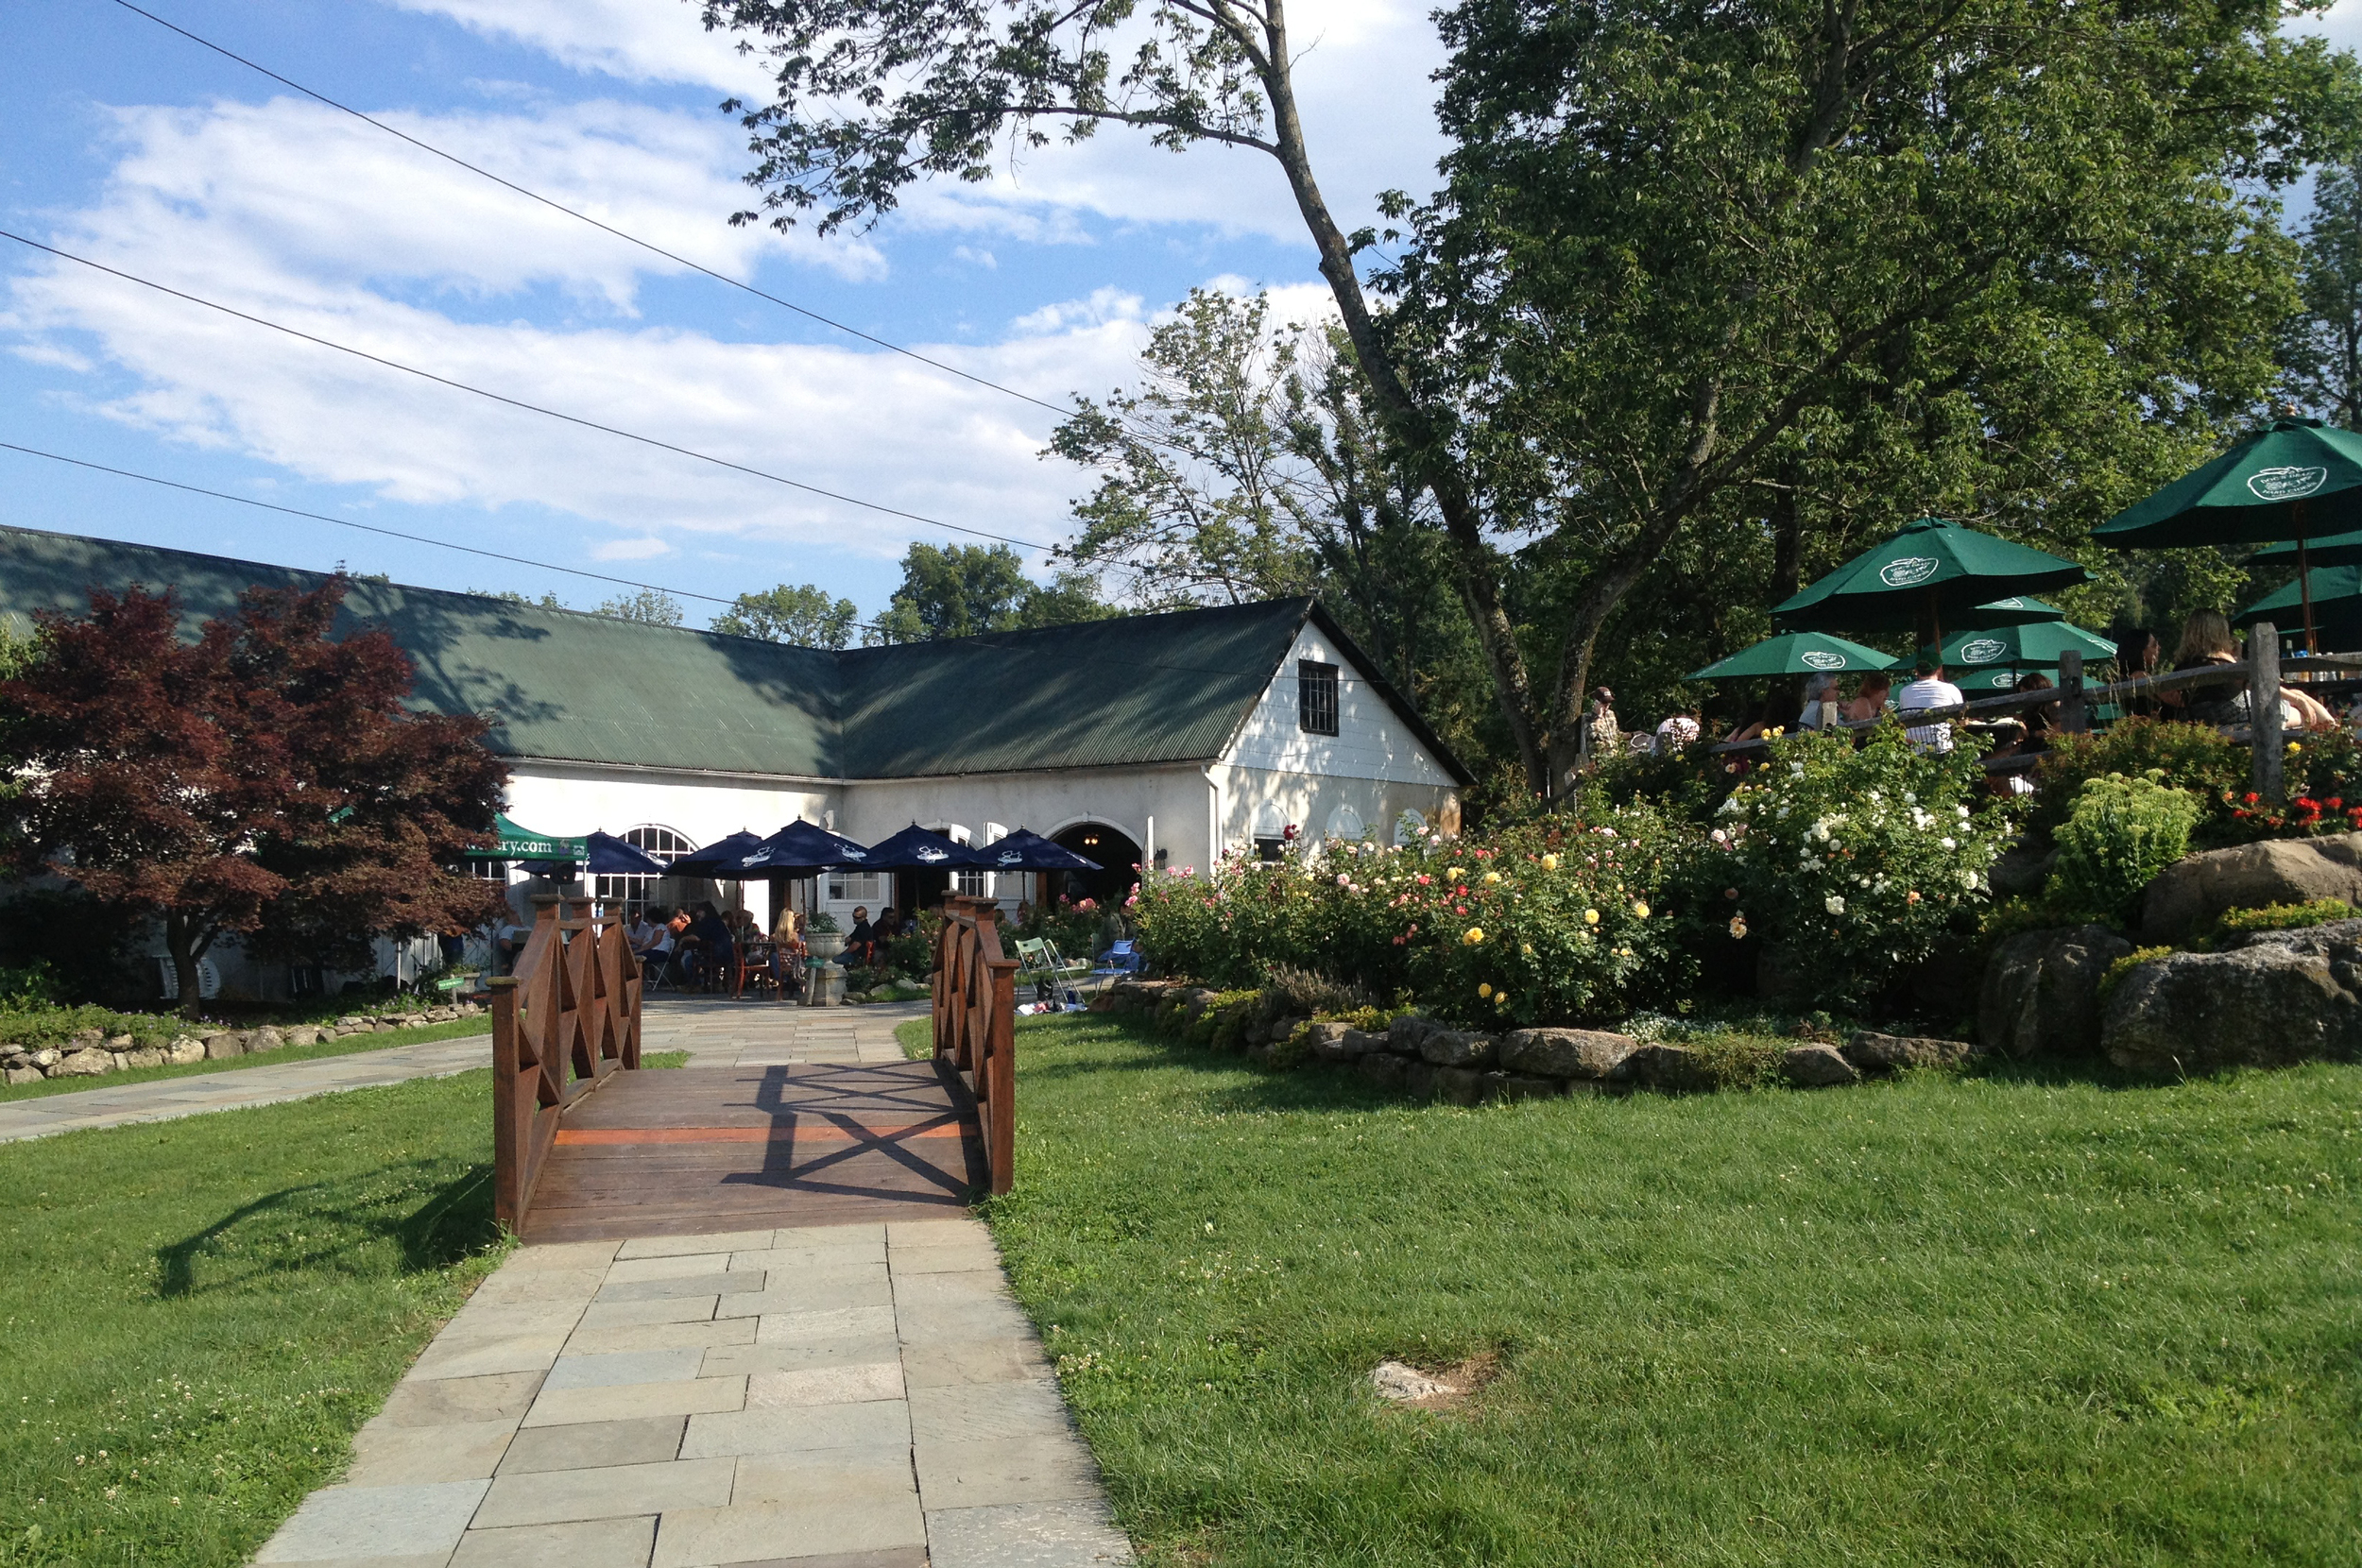 THINGS TO DO: Warwick Valley Winery in Warwick, NY